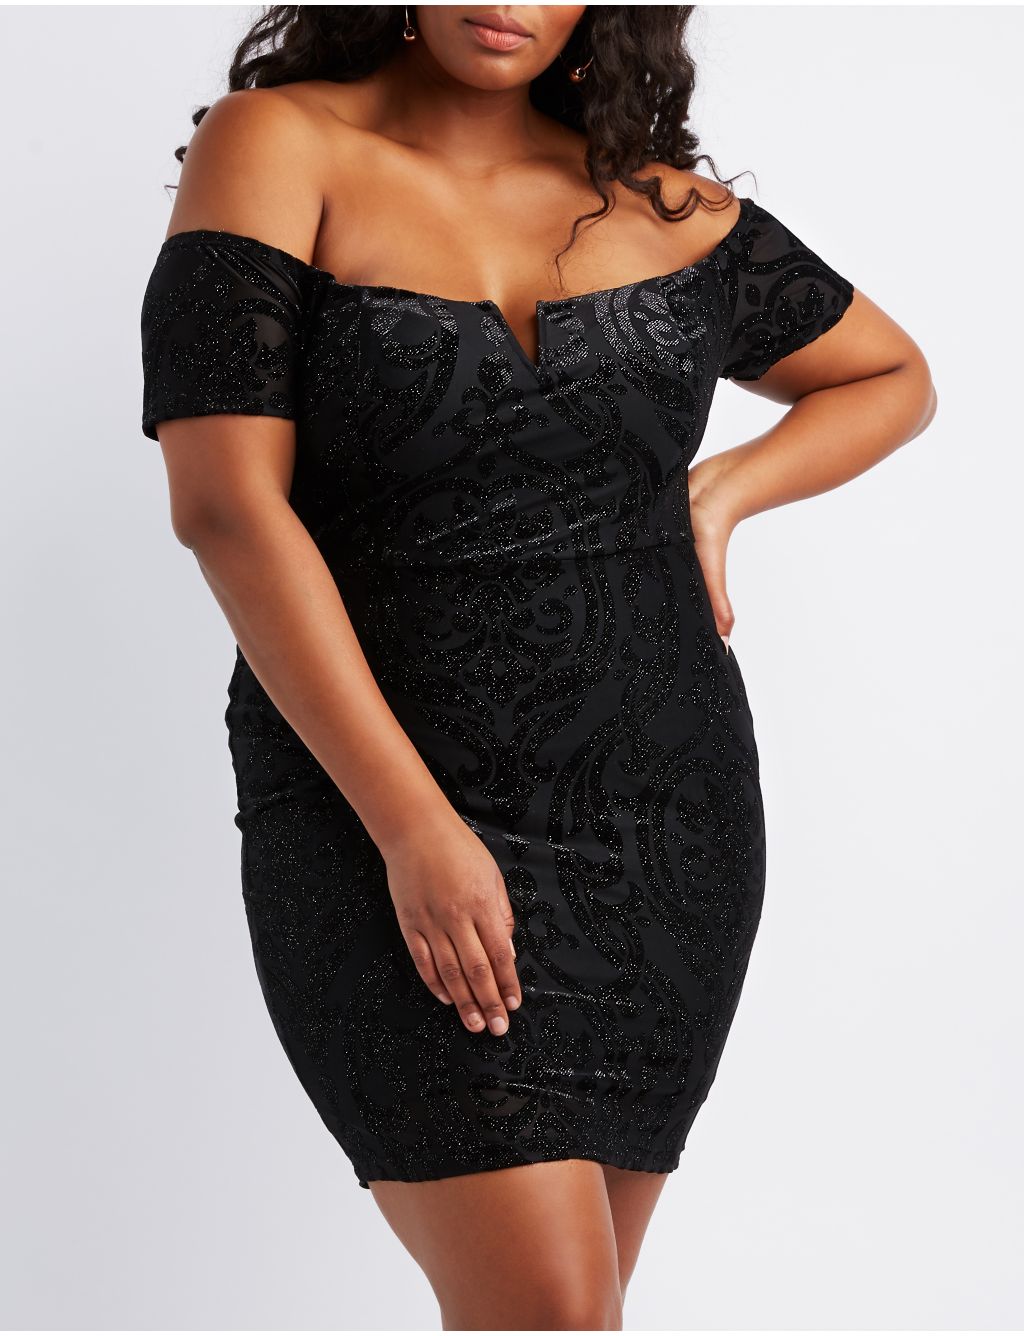 https://www.charlotterusse.com/plus-size-flocked-velvet-off-the-shoulder-bodycon-dress/302473624.html?dwvar_302473624_color=001&cgid=plus-size-new-years-dresses-and-more